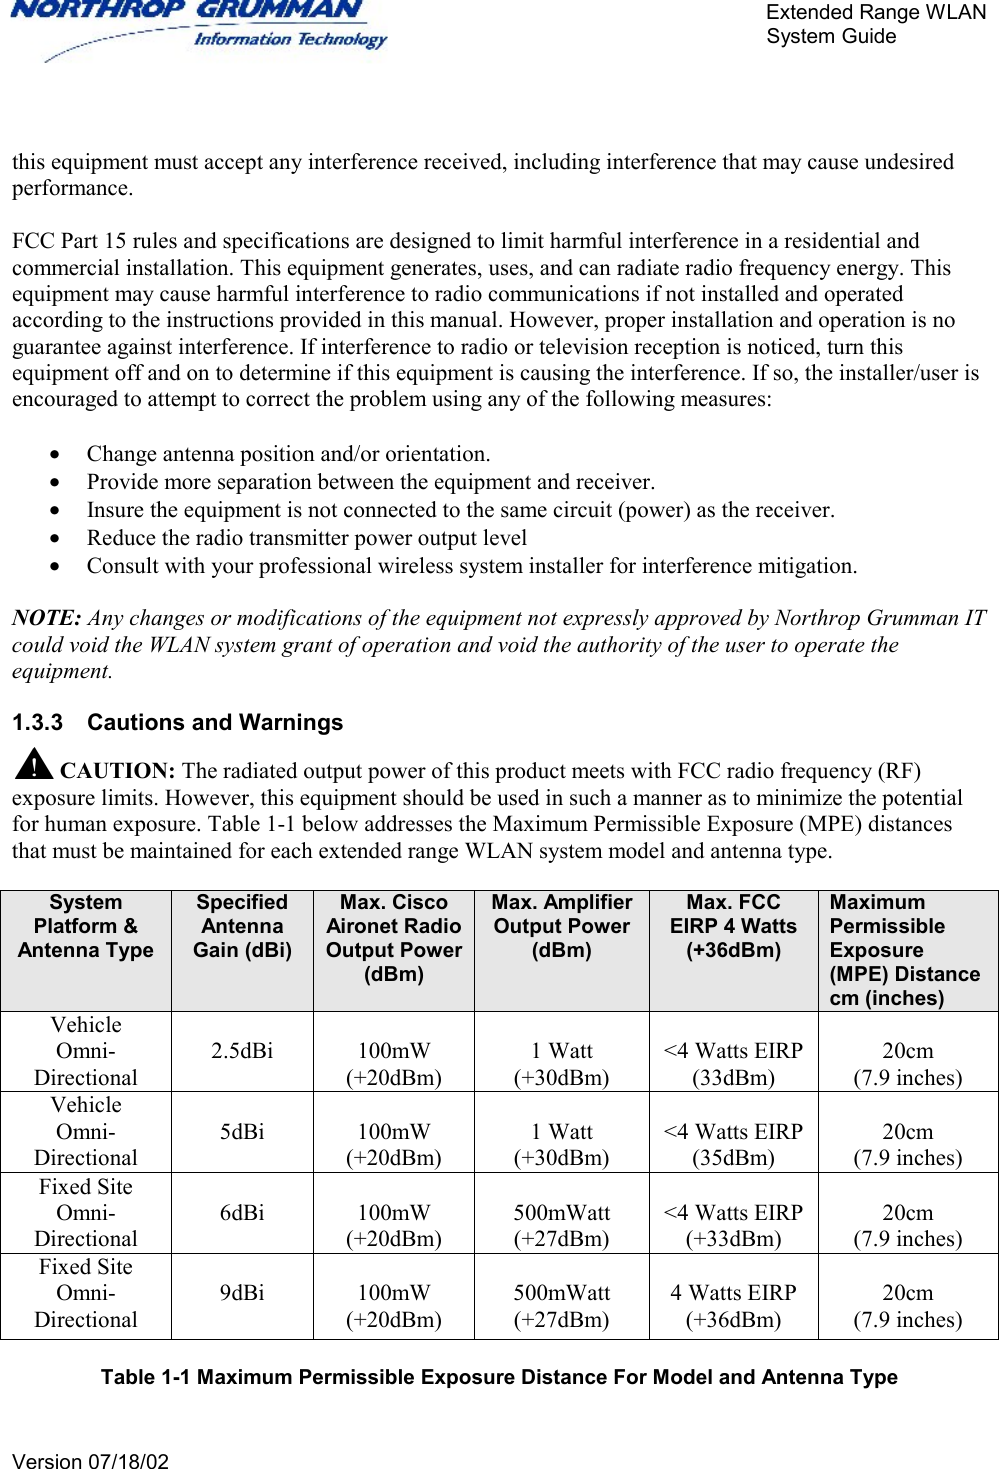       Extended Range WLAN                                                     System Guide     Version 07/18/02    this equipment must accept any interference received, including interference that may cause undesired performance.   FCC Part 15 rules and specifications are designed to limit harmful interference in a residential and commercial installation. This equipment generates, uses, and can radiate radio frequency energy. This equipment may cause harmful interference to radio communications if not installed and operated according to the instructions provided in this manual. However, proper installation and operation is no guarantee against interference. If interference to radio or television reception is noticed, turn this equipment off and on to determine if this equipment is causing the interference. If so, the installer/user is encouraged to attempt to correct the problem using any of the following measures:  •  Change antenna position and/or orientation. •  Provide more separation between the equipment and receiver. •  Insure the equipment is not connected to the same circuit (power) as the receiver. •  Reduce the radio transmitter power output level •  Consult with your professional wireless system installer for interference mitigation.  NOTE: Any changes or modifications of the equipment not expressly approved by Northrop Grumman IT could void the WLAN system grant of operation and void the authority of the user to operate the equipment. 1.3.3  Cautions and Warnings  CAUTION: The radiated output power of this product meets with FCC radio frequency (RF) exposure limits. However, this equipment should be used in such a manner as to minimize the potential for human exposure. Table 1-1 below addresses the Maximum Permissible Exposure (MPE) distances that must be maintained for each extended range WLAN system model and antenna type.  System Platform &amp; Antenna Type Specified Antenna Gain (dBi) Max. Cisco Aironet Radio Output Power (dBm) Max. Amplifier Output Power (dBm) Max. FCC EIRP 4 Watts  (+36dBm) Maximum Permissible Exposure (MPE) Distance cm (inches) Vehicle Omni-Directional  2.5dBi  100mW (+20dBm)  1 Watt (+30dBm)  &lt;4 Watts EIRP (33dBm)  20cm (7.9 inches) Vehicle Omni-Directional  5dBi  100mW (+20dBm)  1 Watt (+30dBm)  &lt;4 Watts EIRP (35dBm)  20cm (7.9 inches) Fixed Site Omni-Directional  6dBi  100mW (+20dBm)  500mWatt (+27dBm)  &lt;4 Watts EIRP (+33dBm)  20cm (7.9 inches) Fixed Site Omni-Directional  9dBi  100mW (+20dBm)  500mWatt (+27dBm)  4 Watts EIRP (+36dBm)  20cm (7.9 inches)  Table 1-1 Maximum Permissible Exposure Distance For Model and Antenna Type   